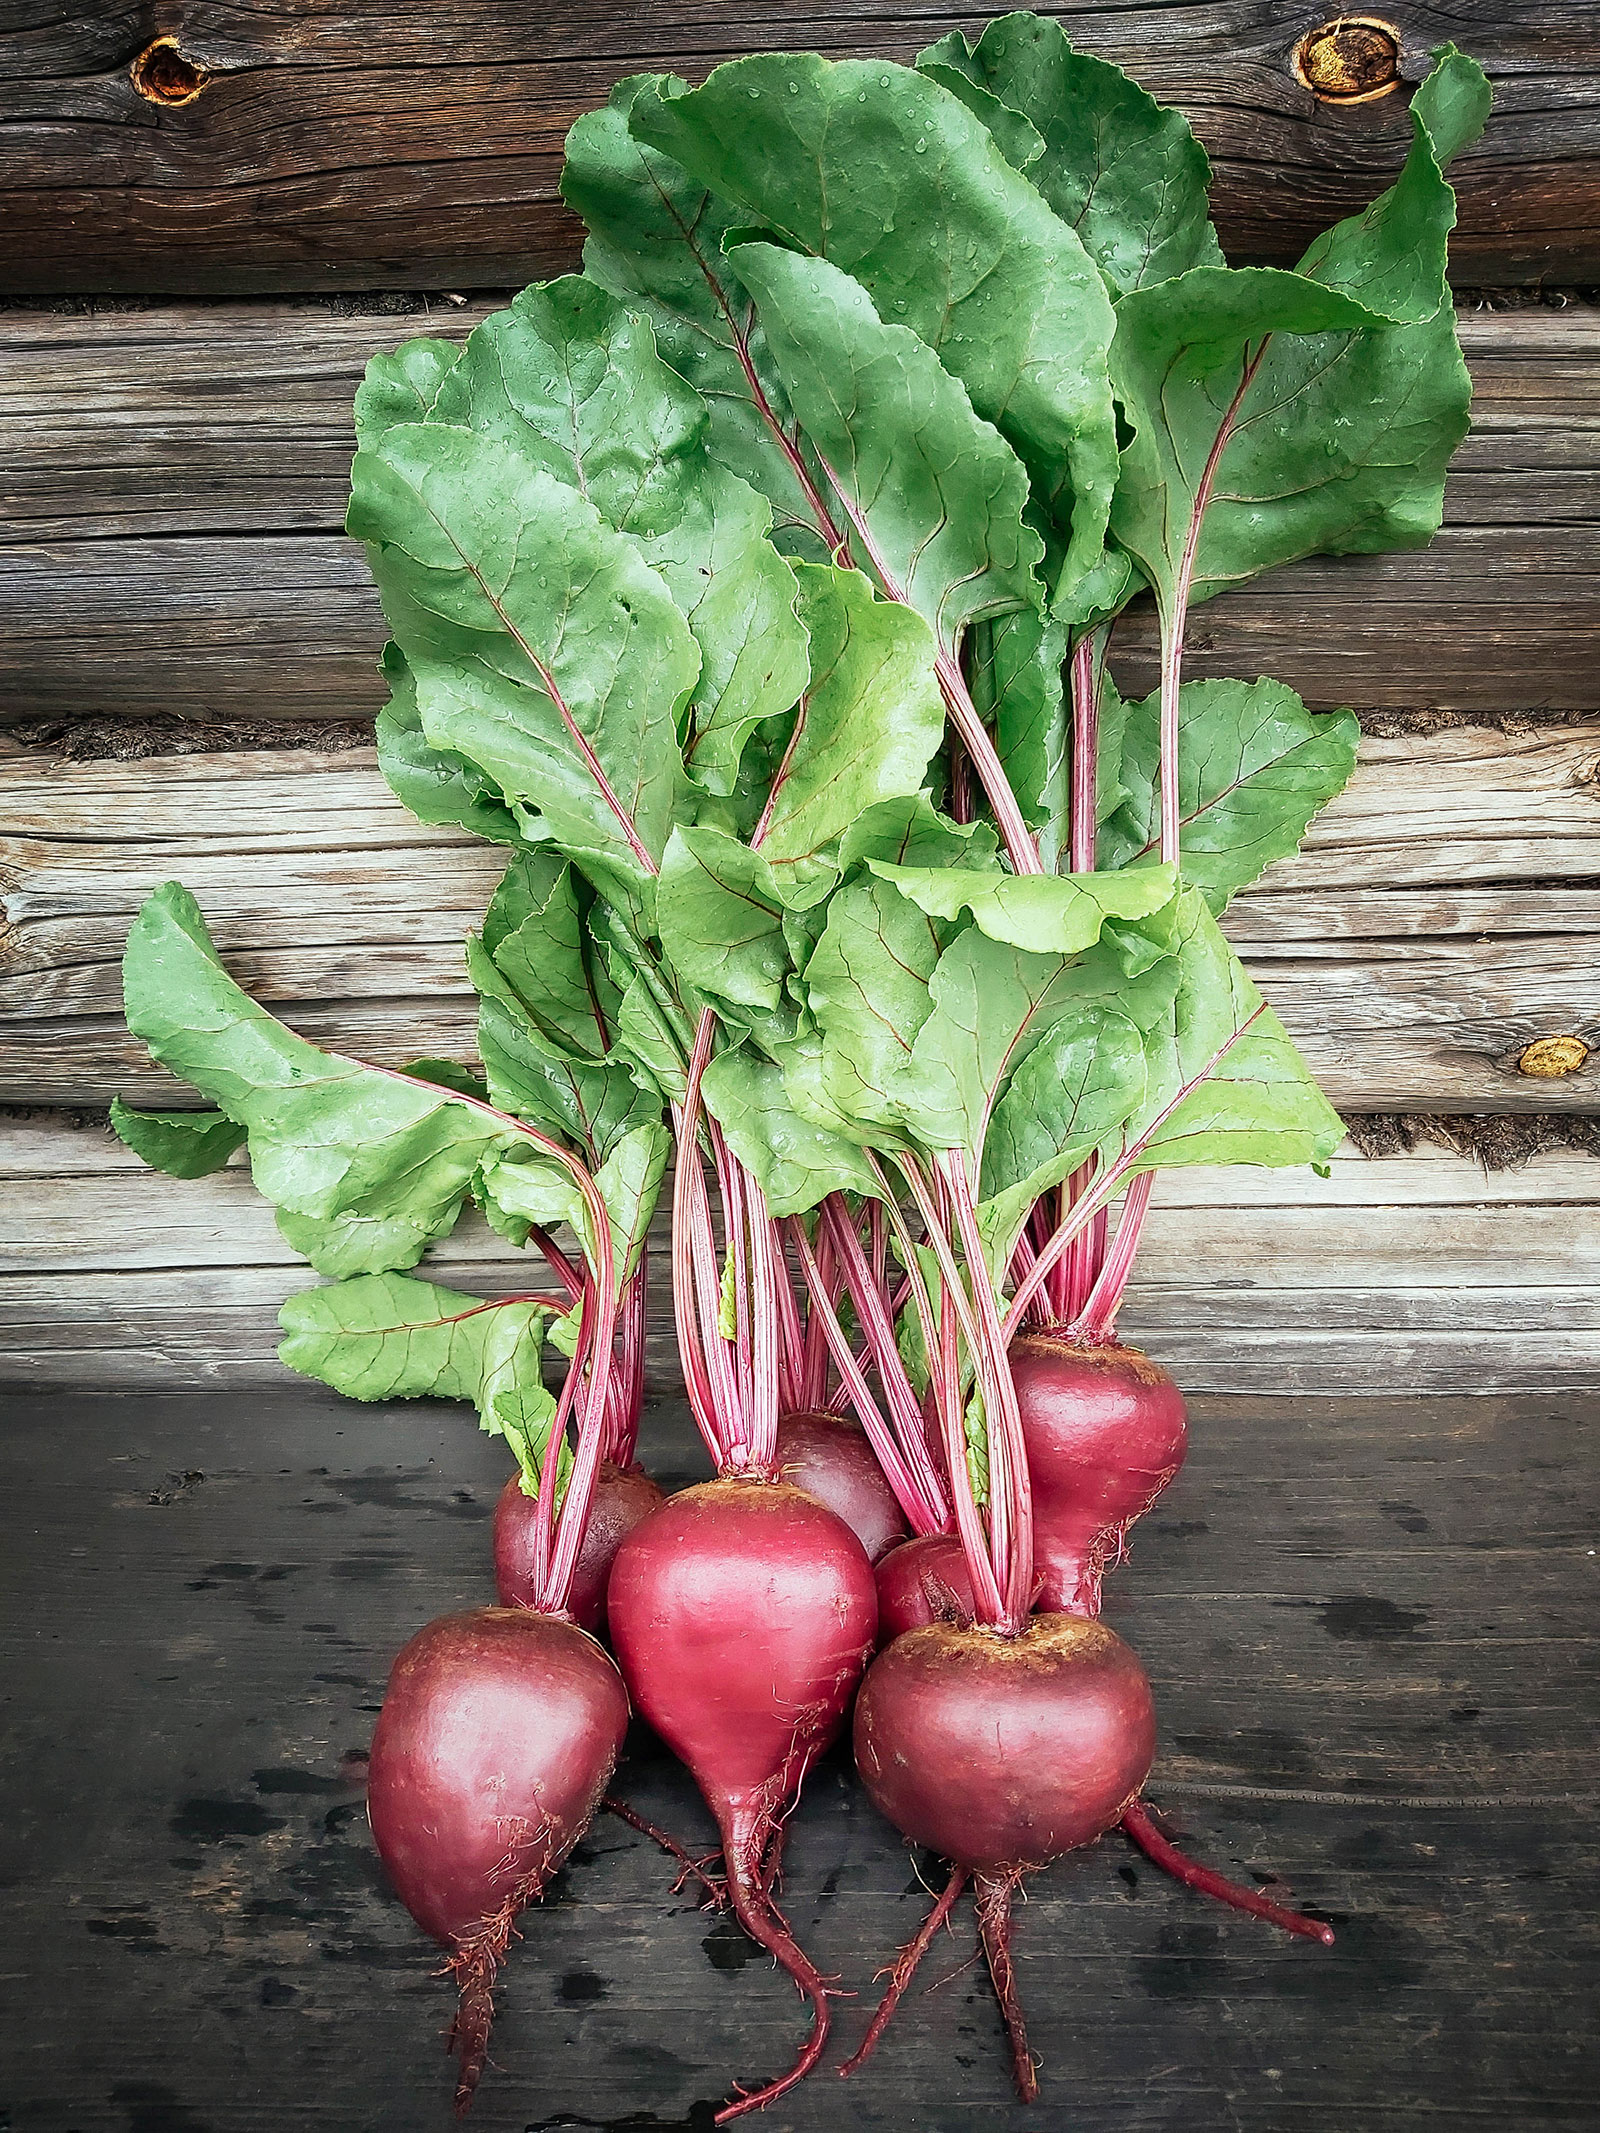 Bunch of red baby beets on a rustic wooden surface